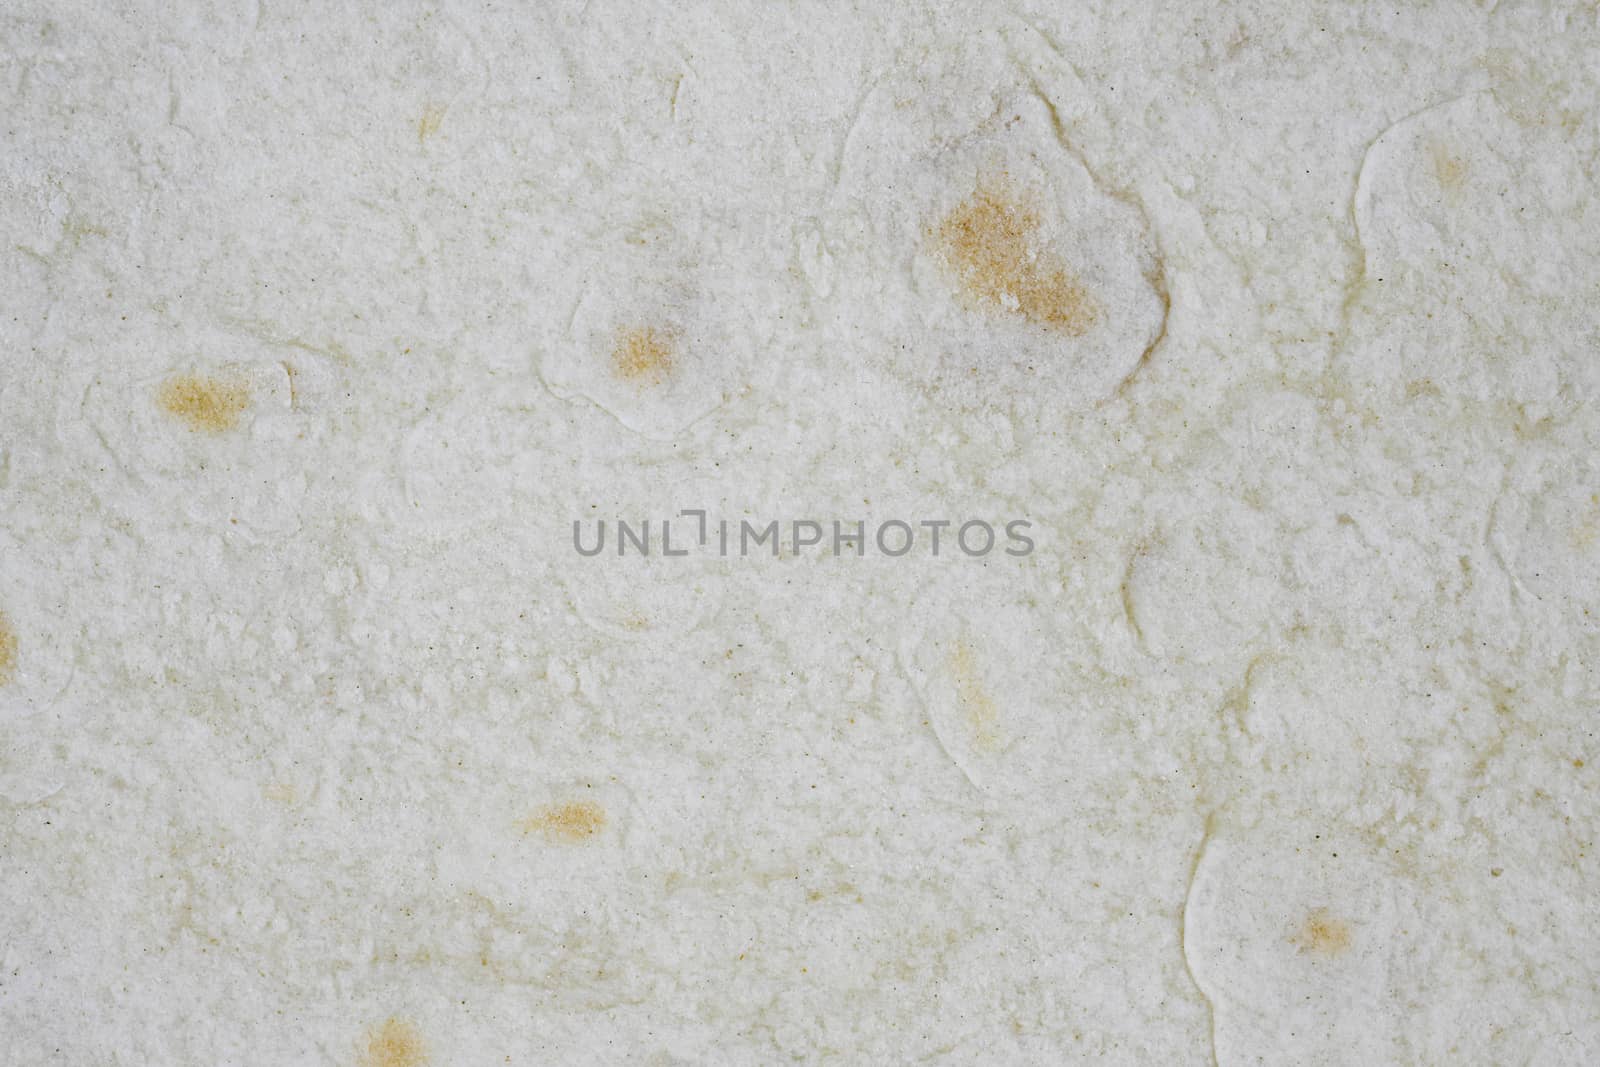 Texture of thin traditional freshly baked homemade oriental bread. Close-up Armenian pita bread - lavash as a textured bread background